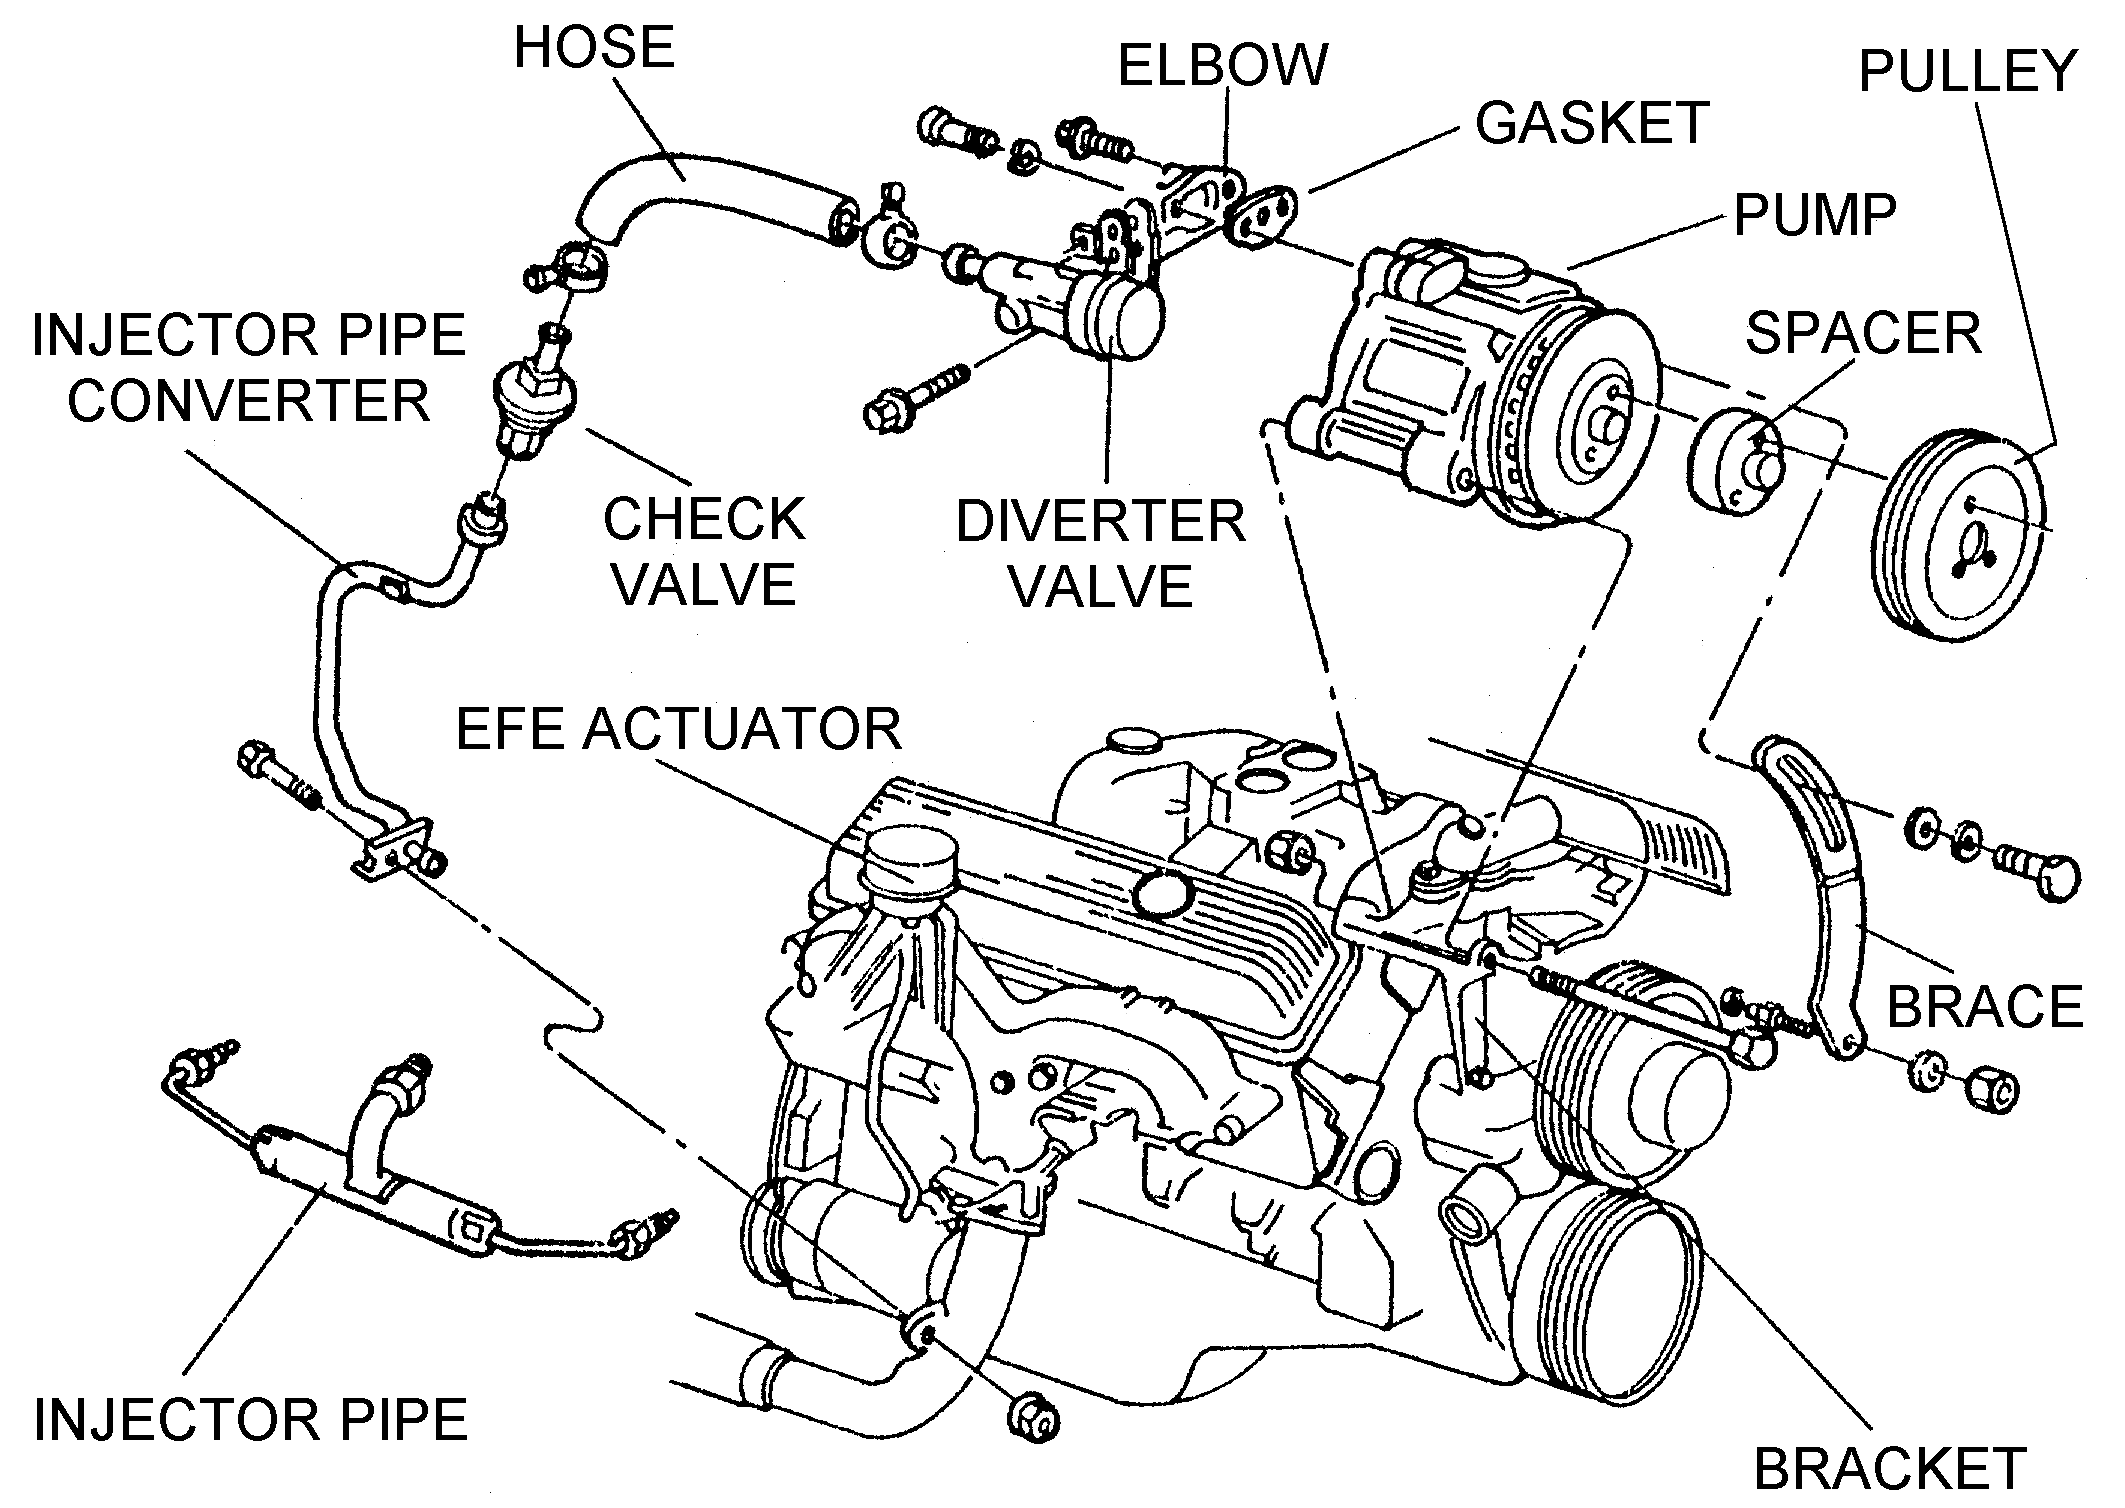 Pump And Injector Pipe Detail - Diagram View